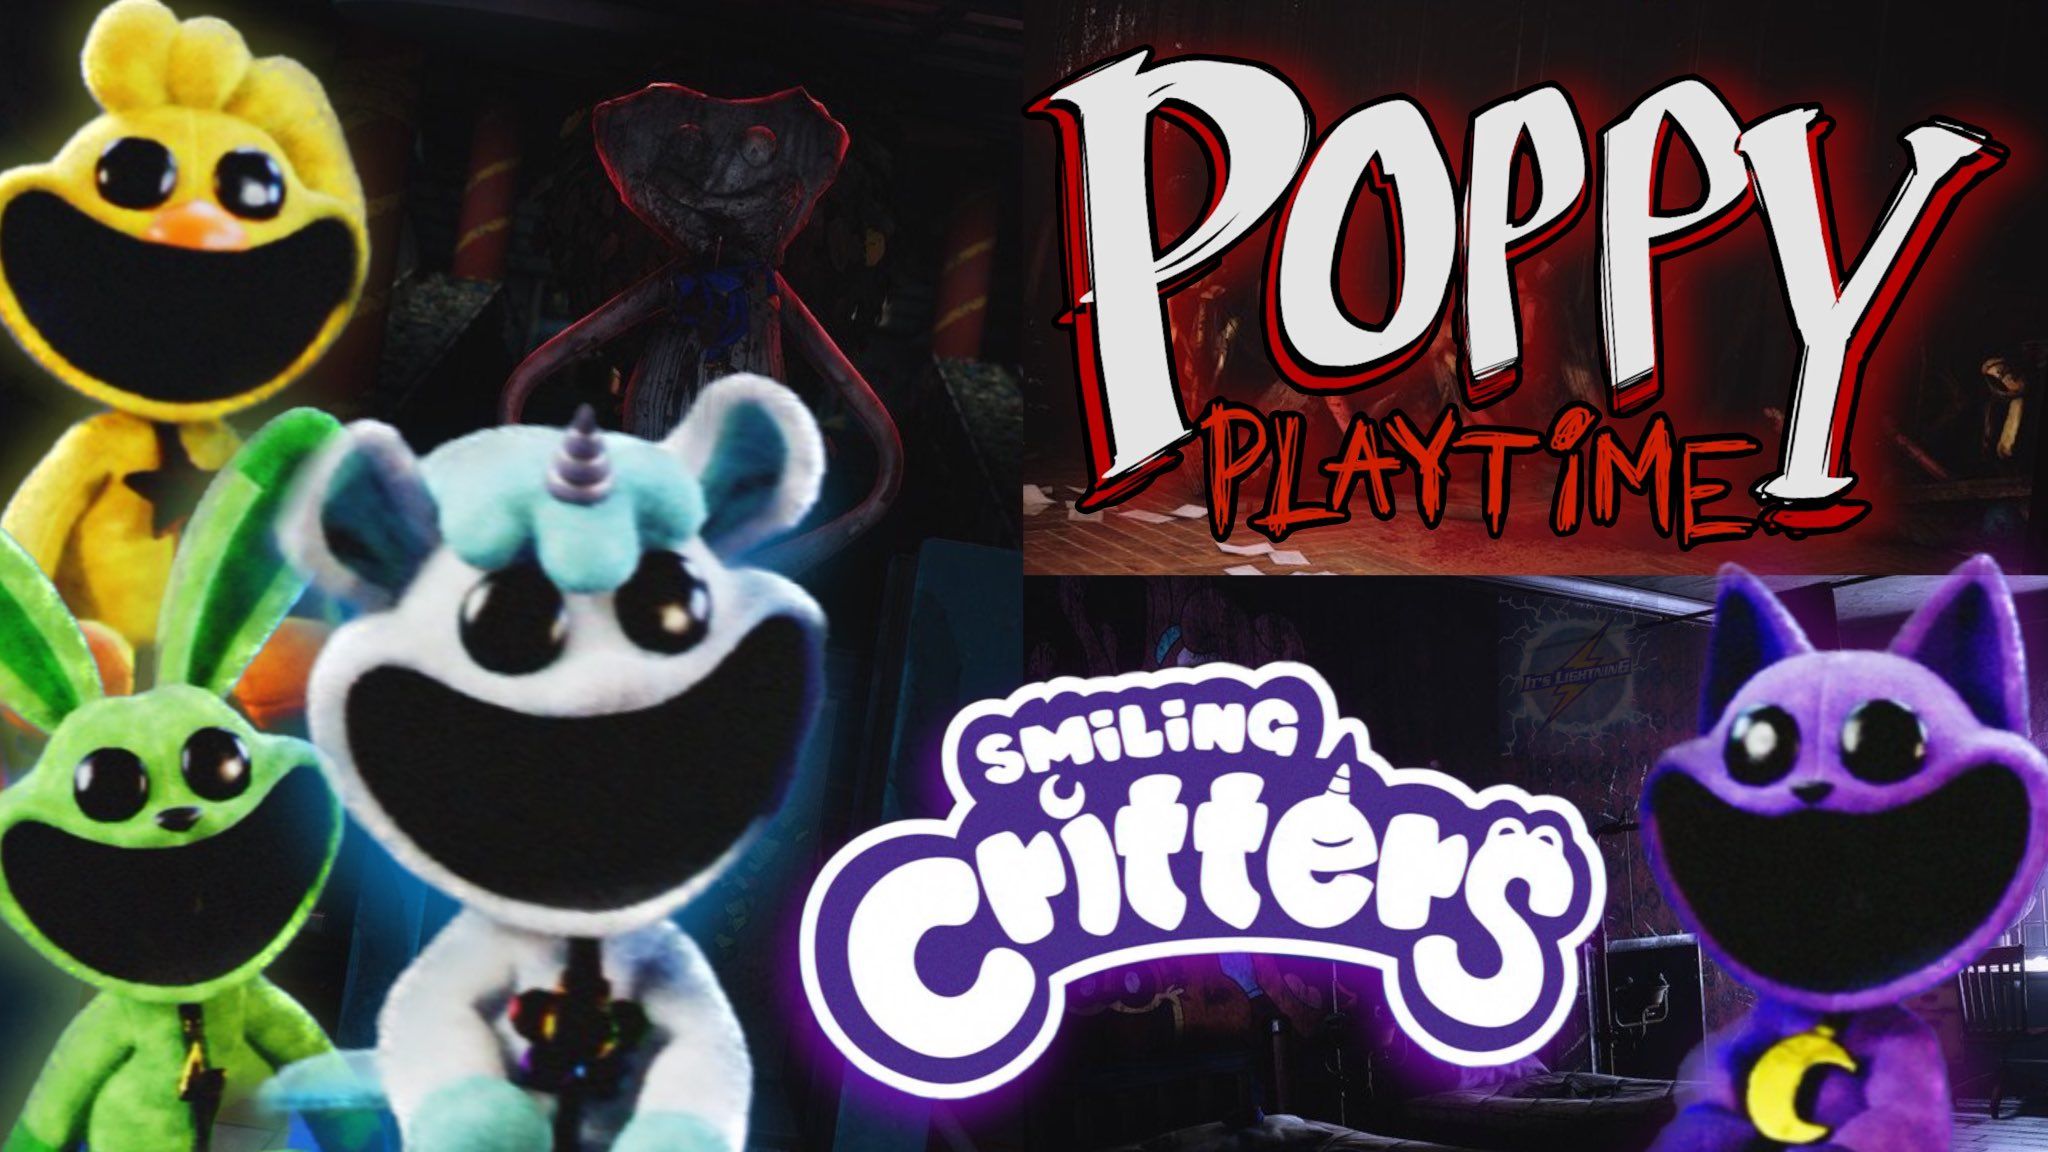 Poppy Playtime 3 ARG explains Smiling Critters, confirms CatNap as